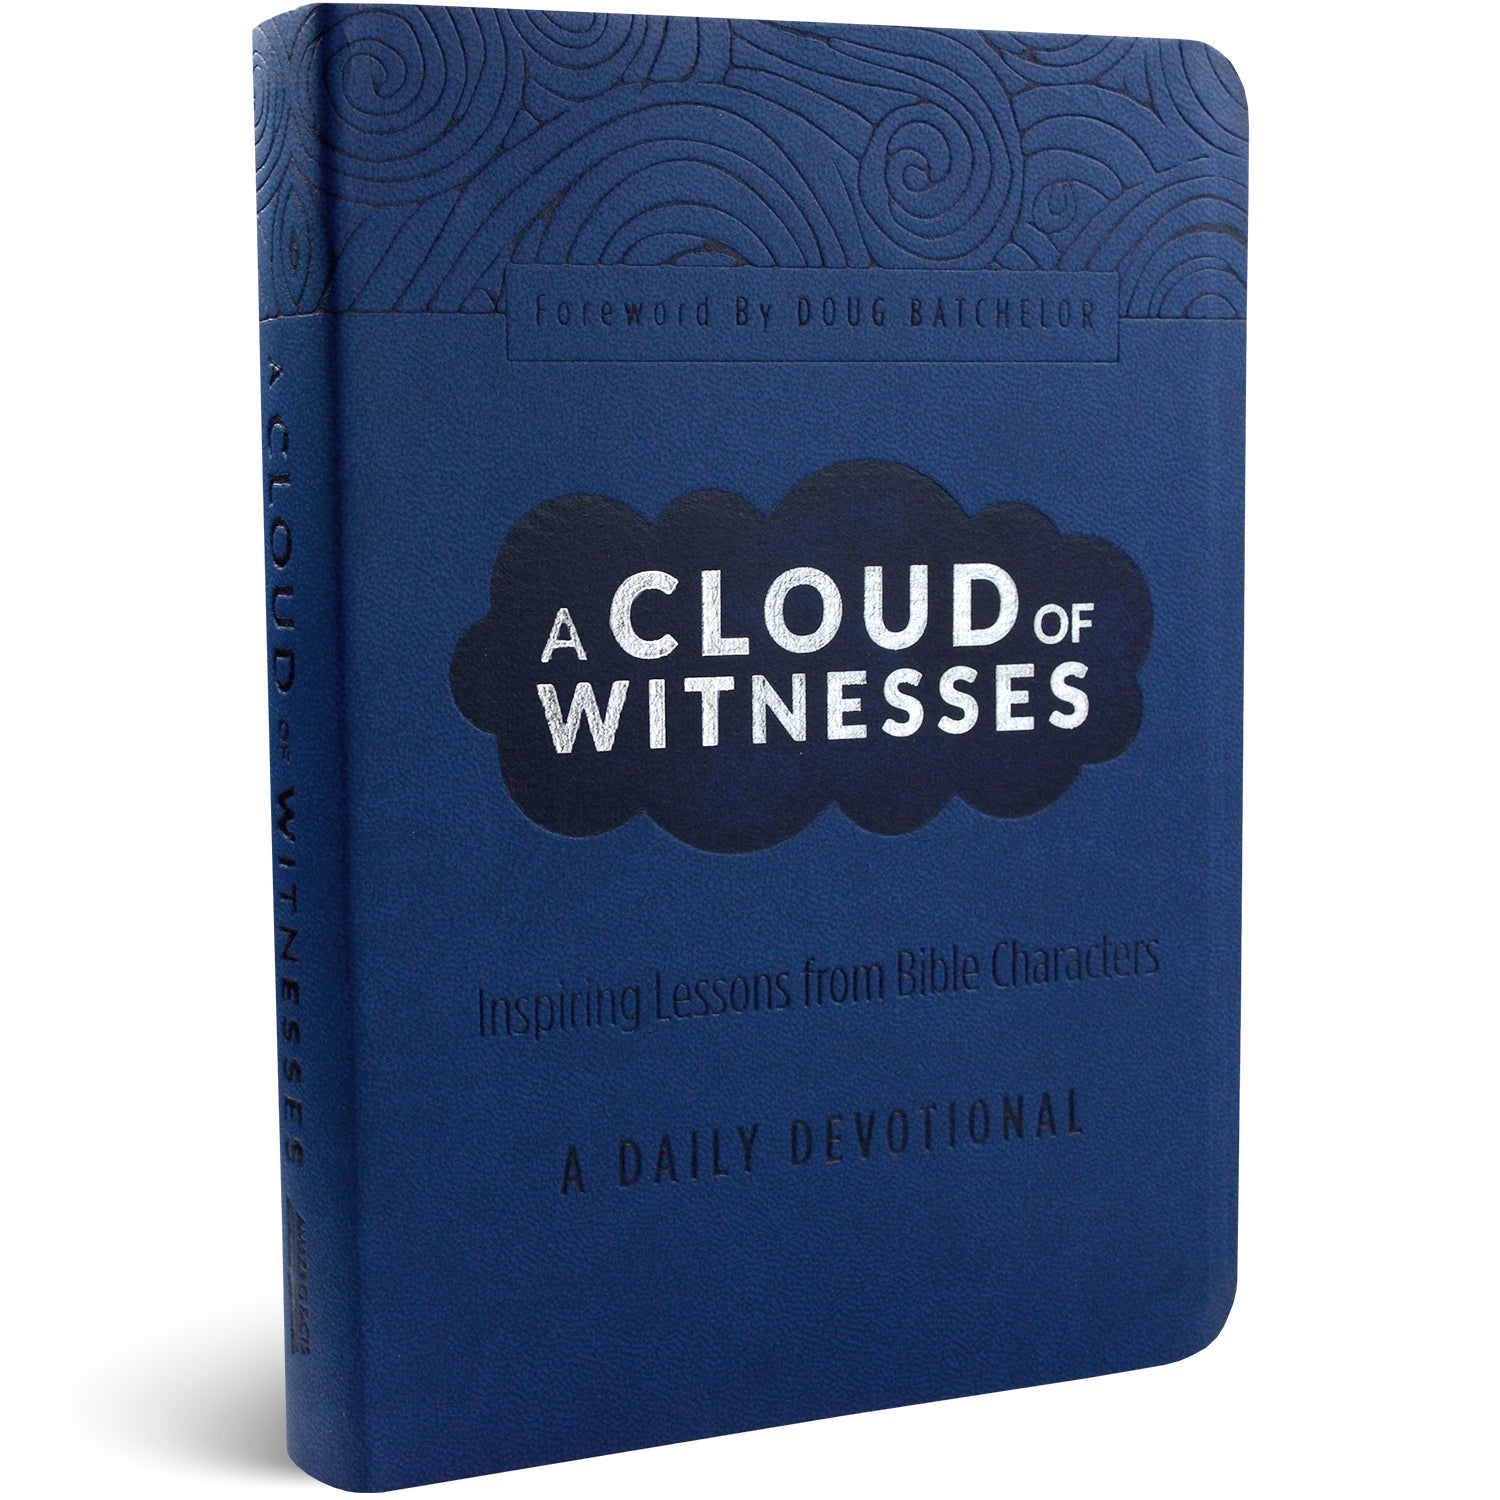 A Cloud of Witnesses: A Daily Devotional by Amazing Facts